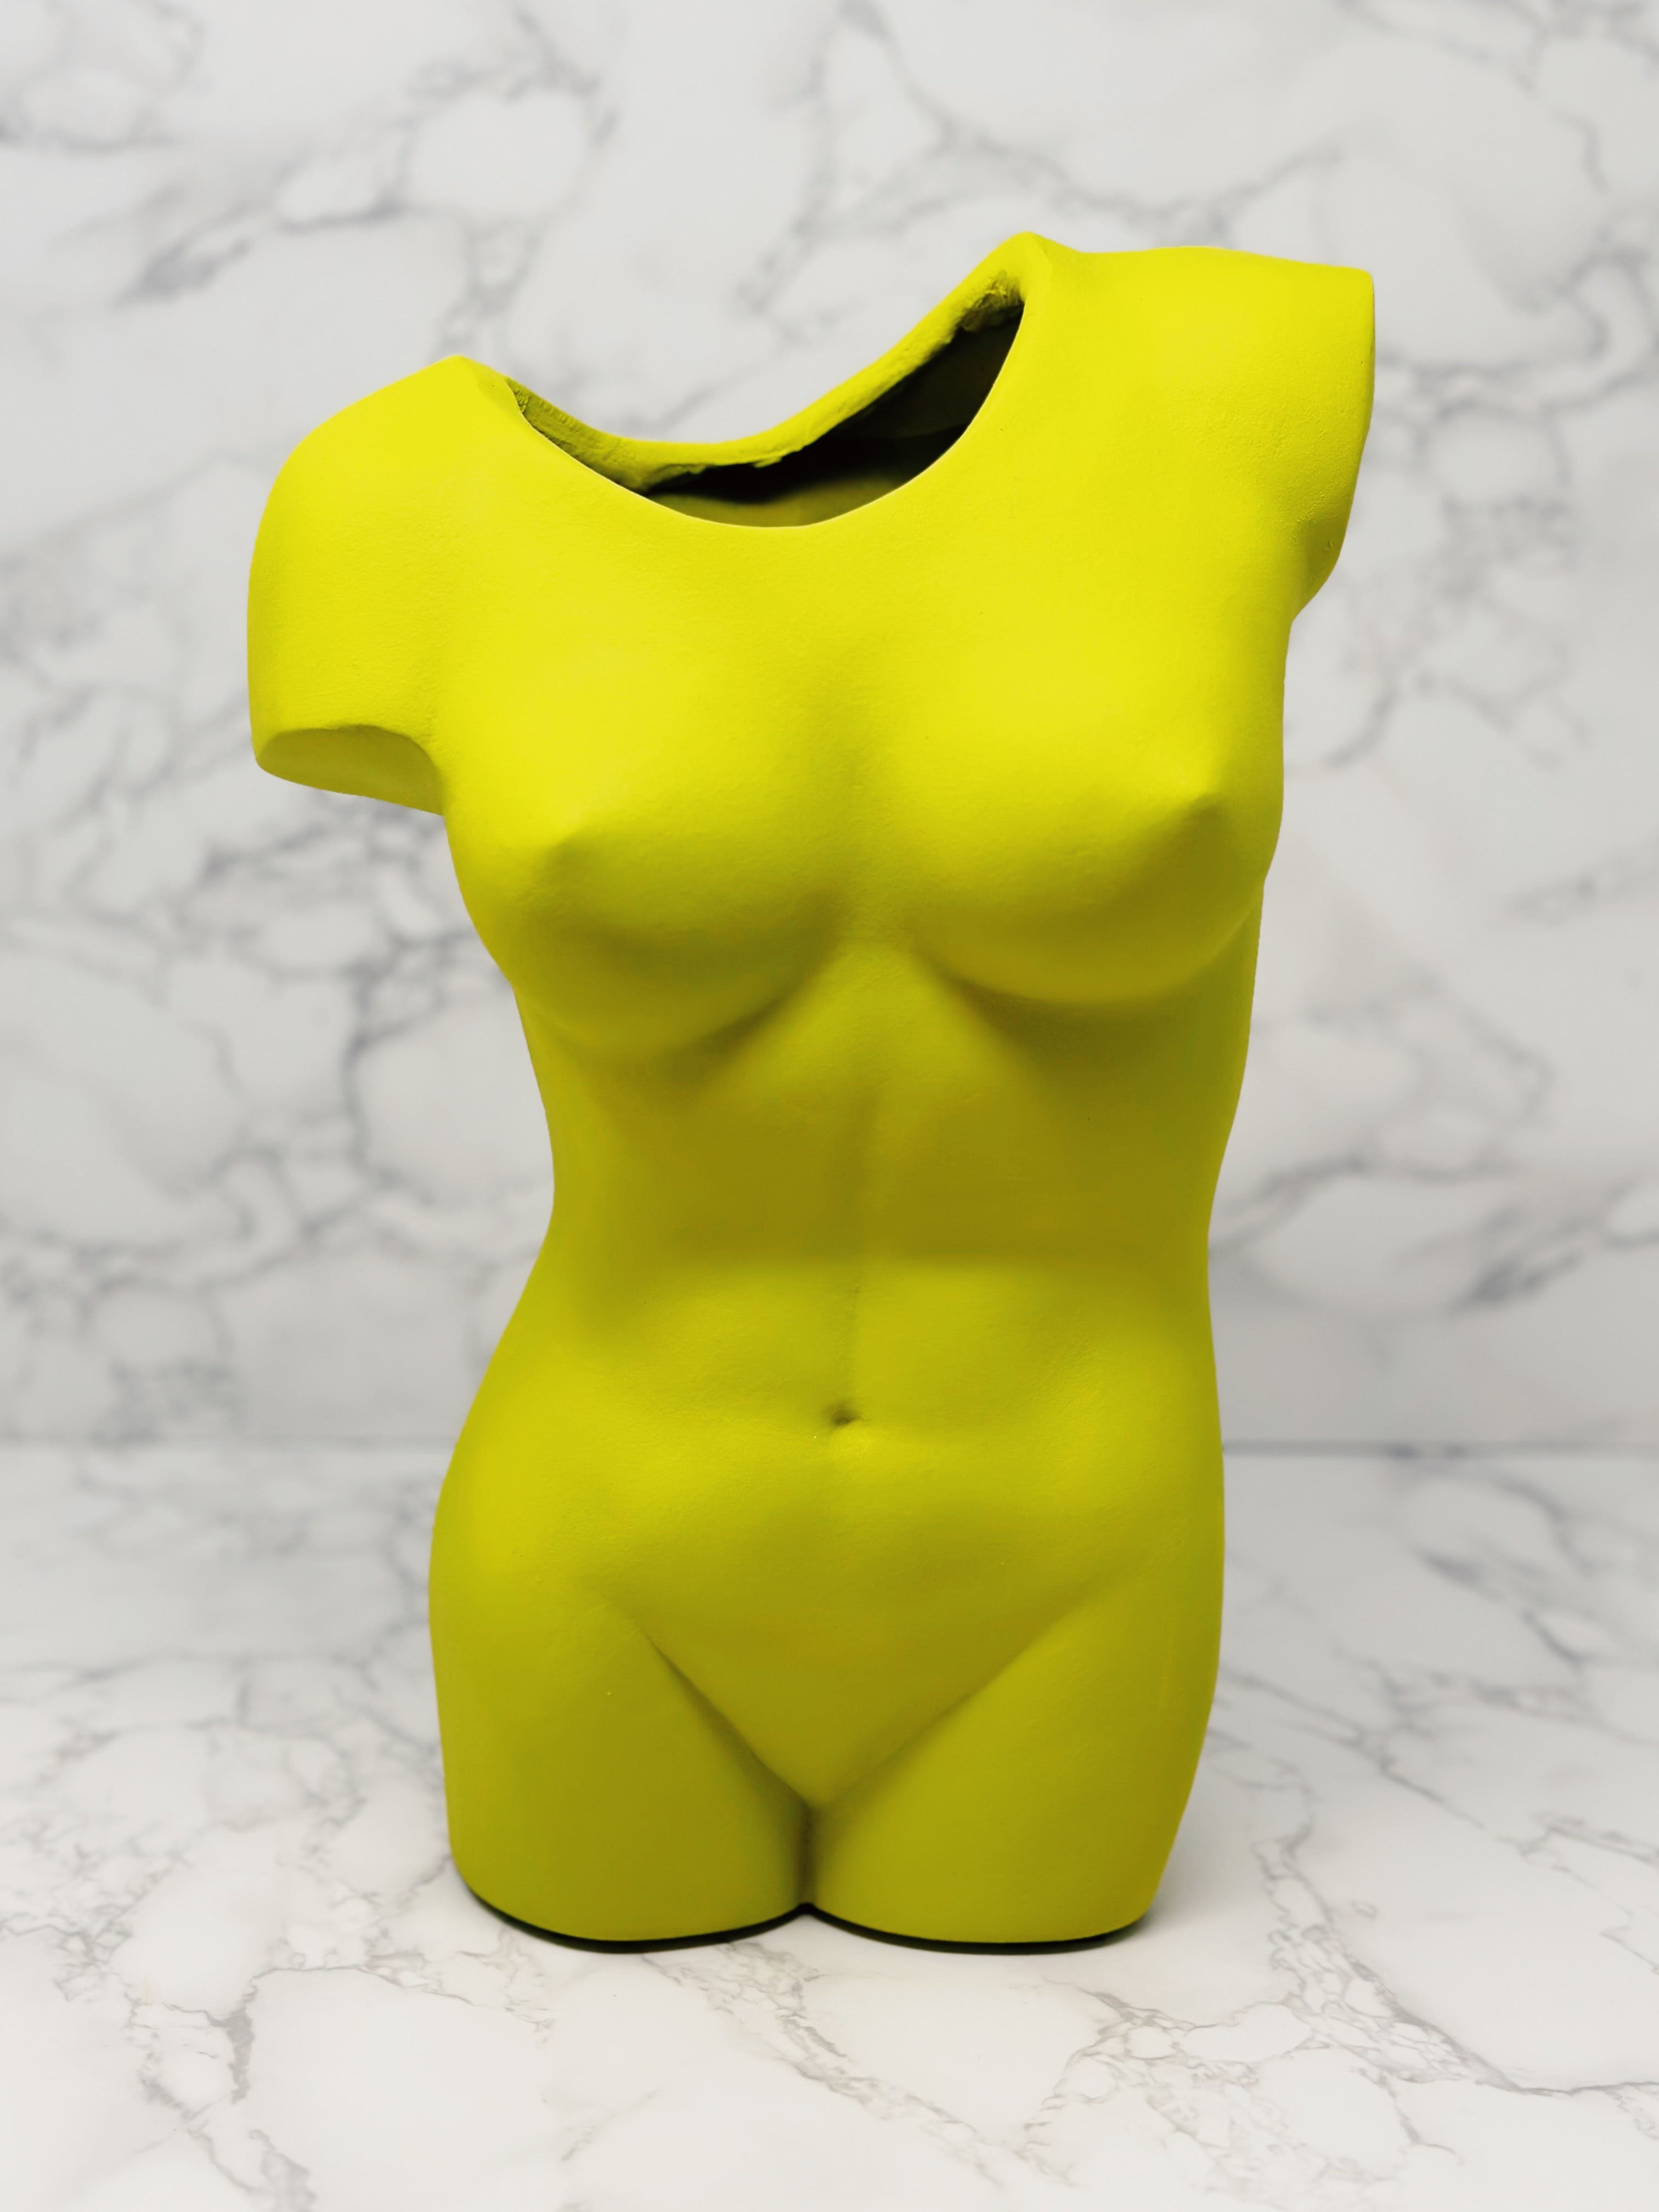 Womens Torso Vase in Canary